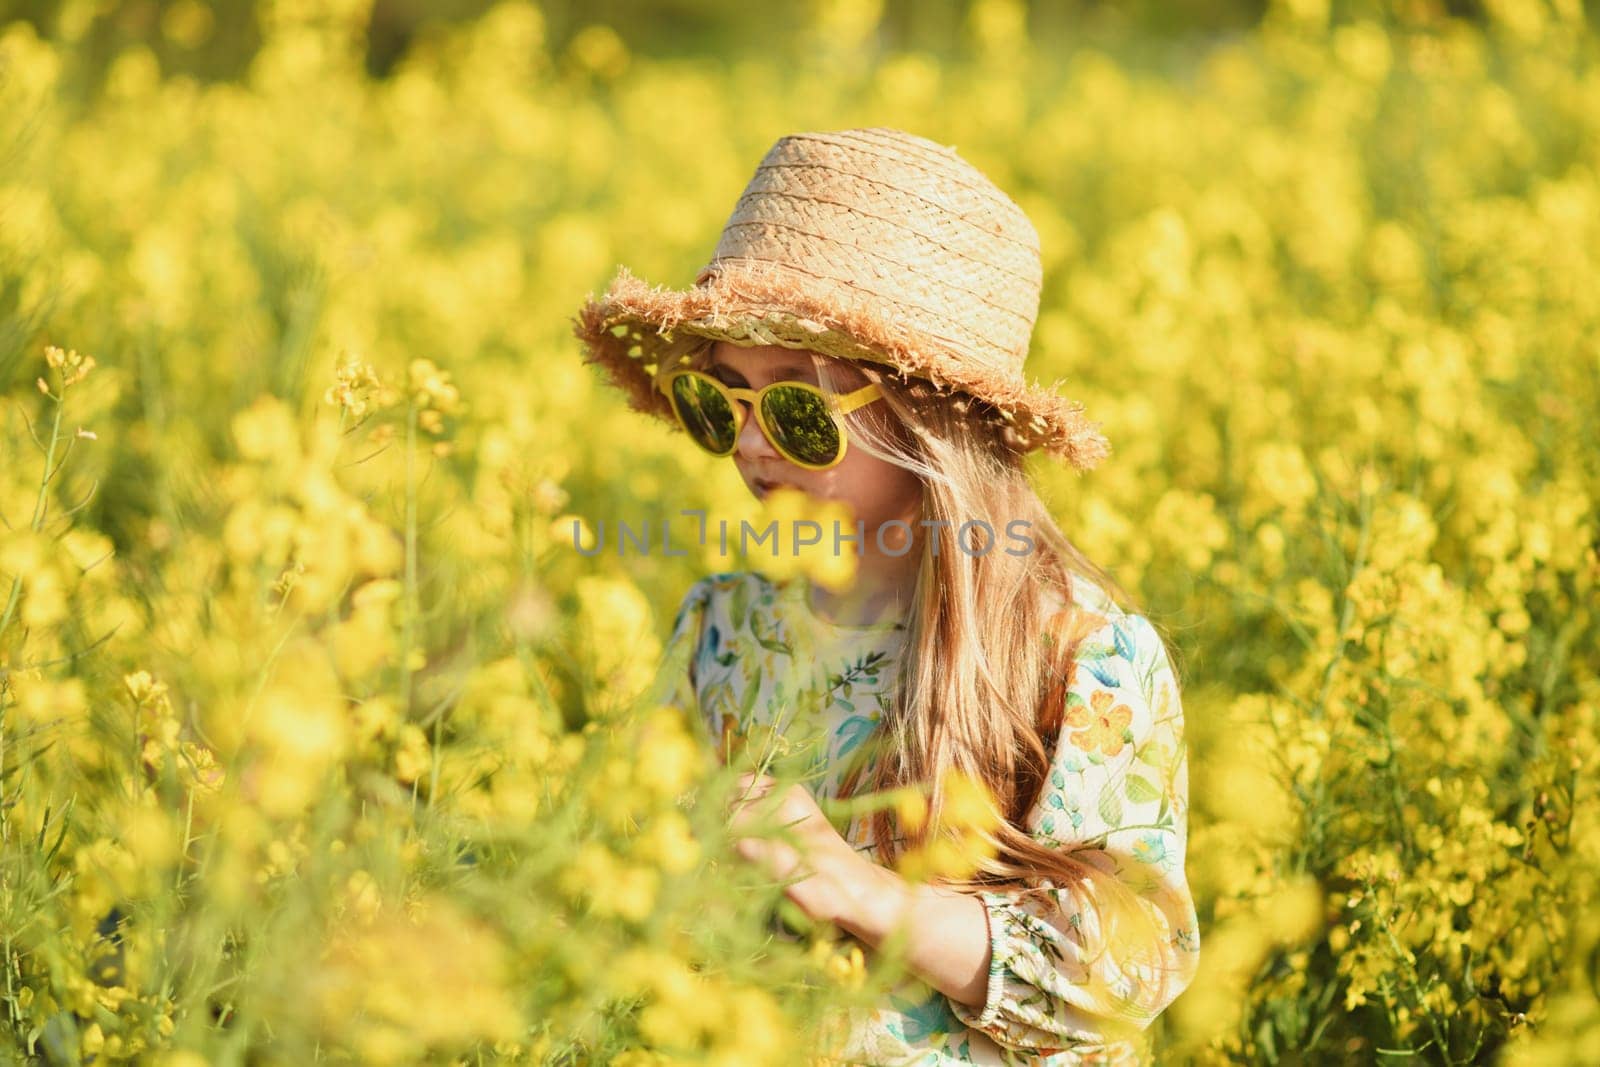 A girl in a dress in a field of rapeseed smelling flowers by Godi